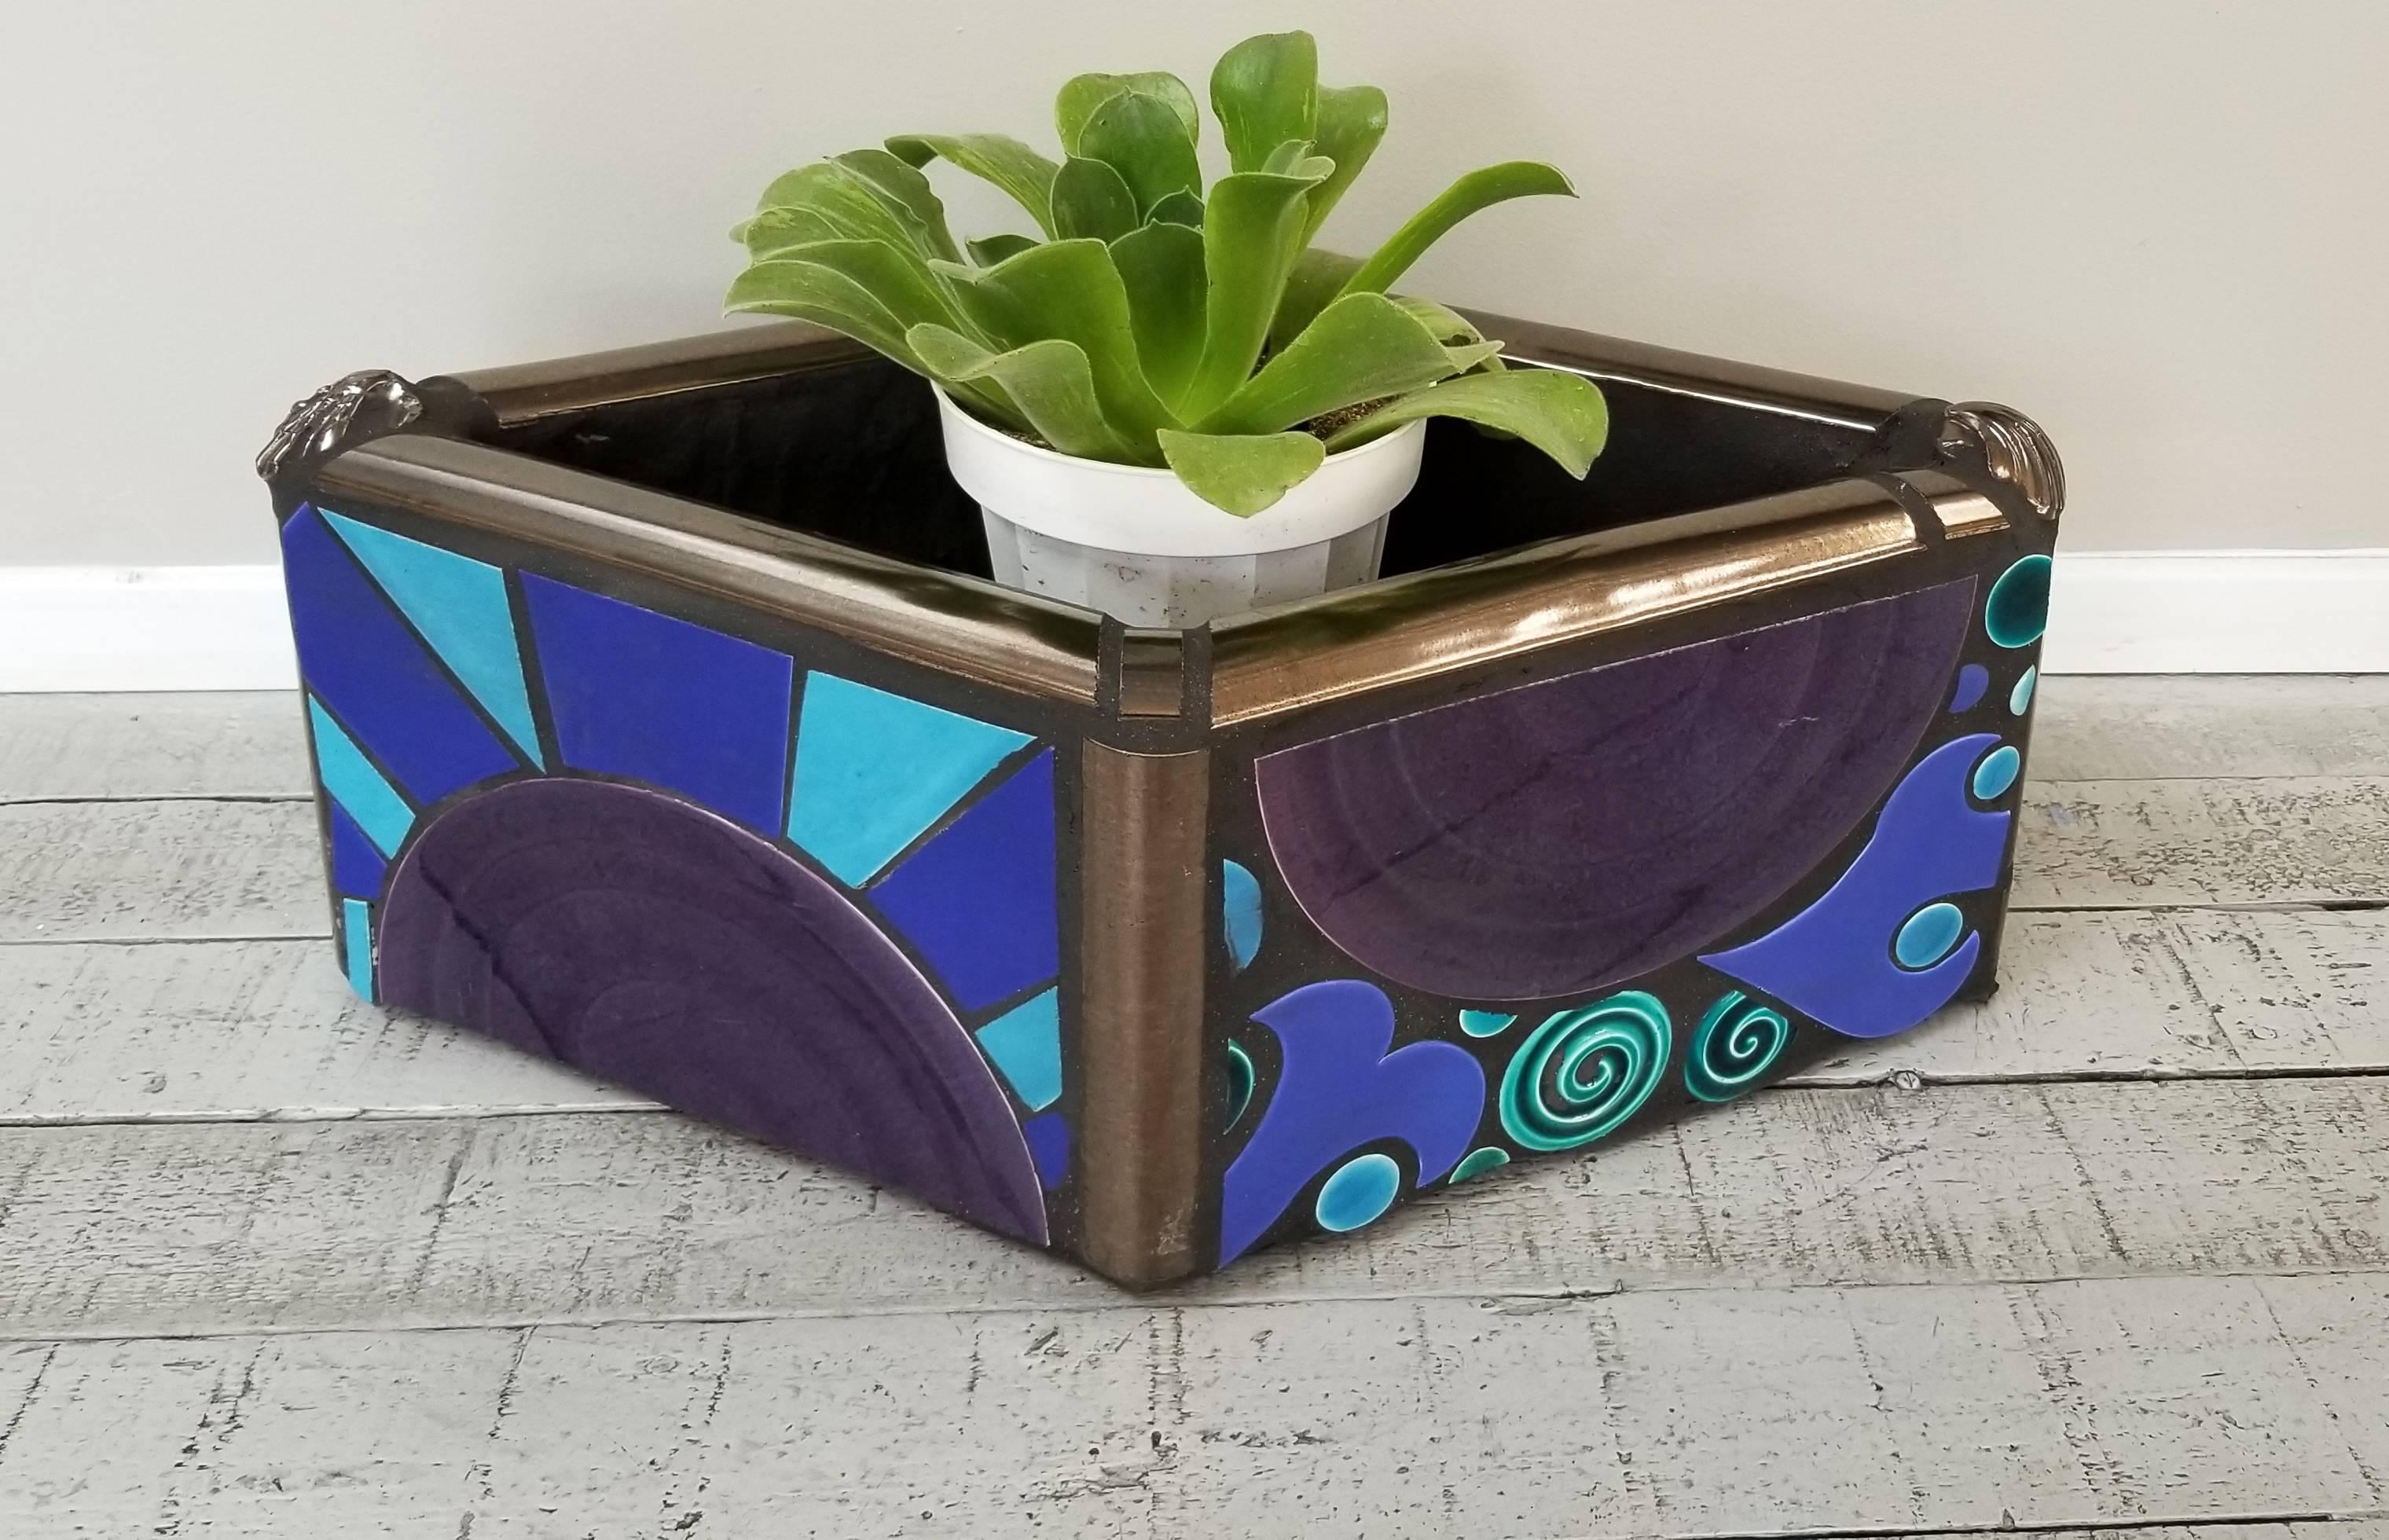 PLanter #3 - Abstract Expressionist Art by Marlo Bartels